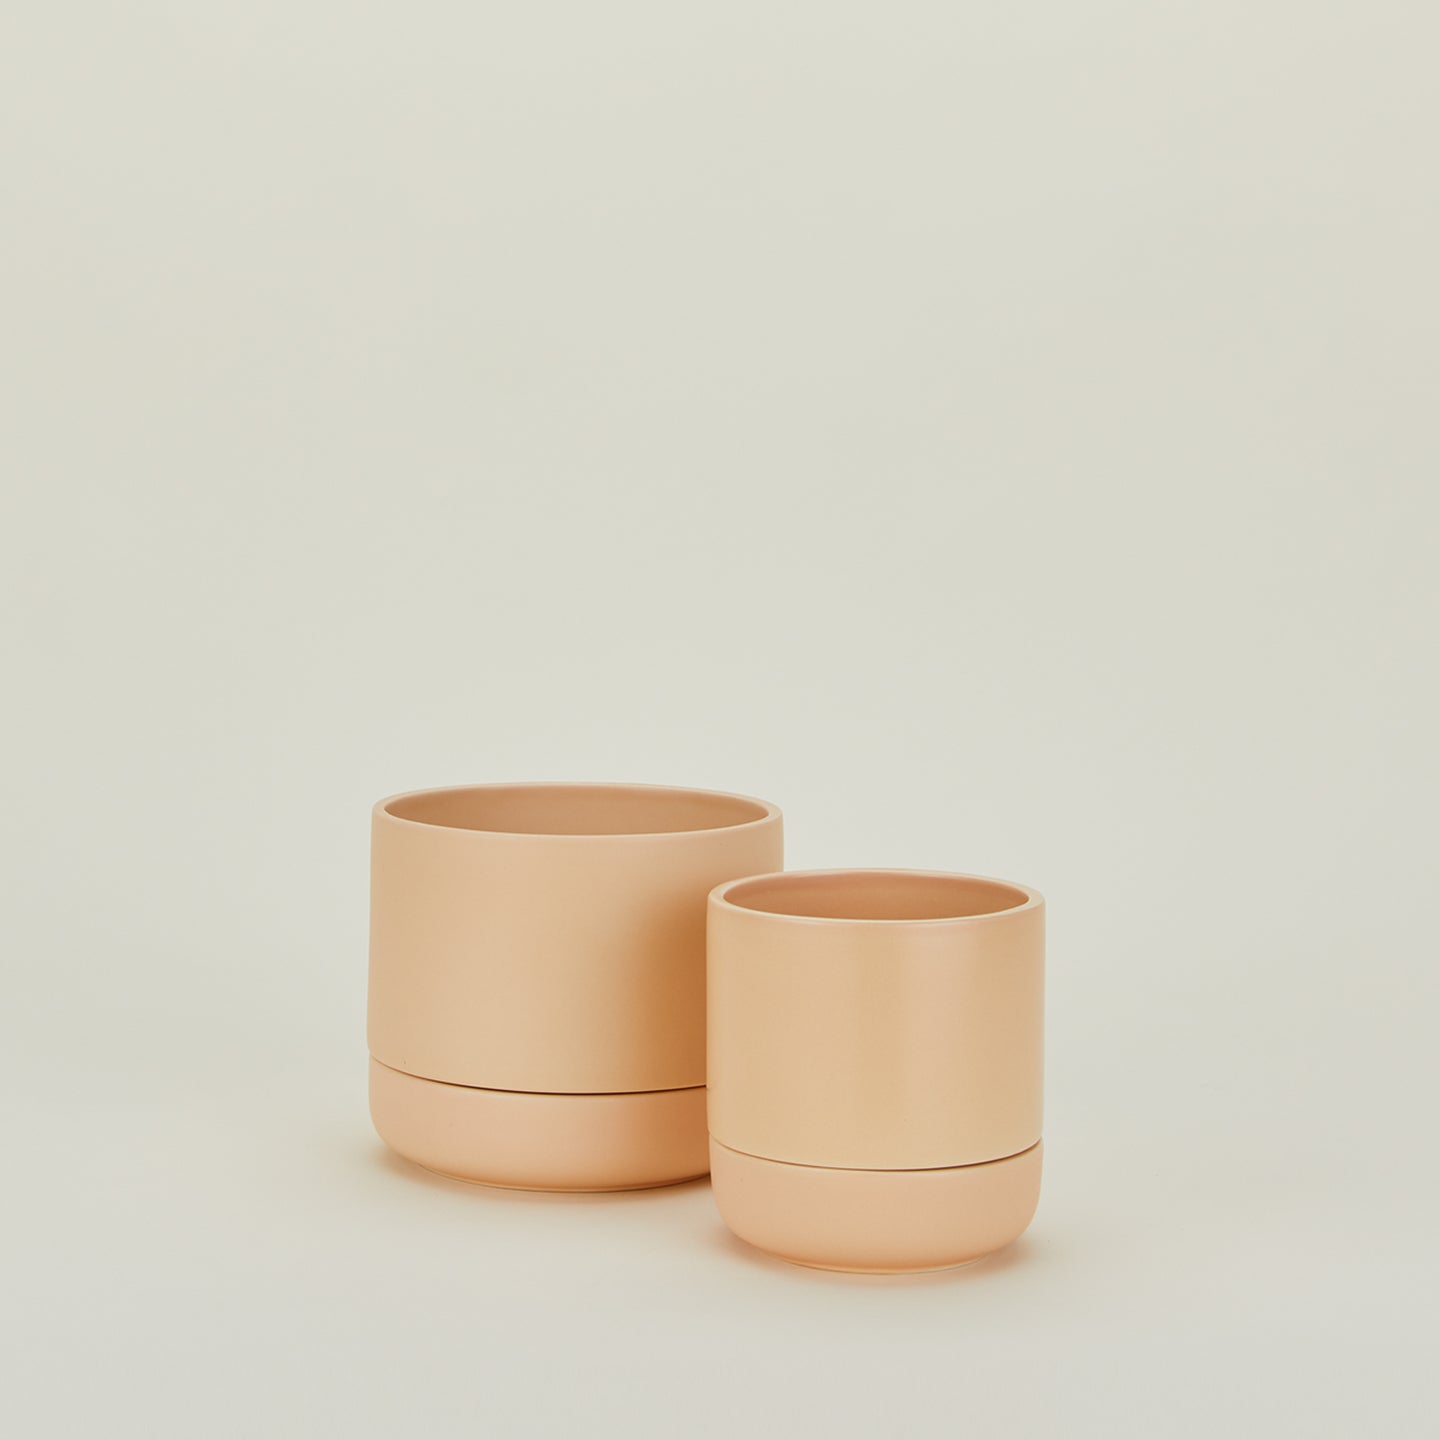 Franklin Self Watering Planter - Apricot